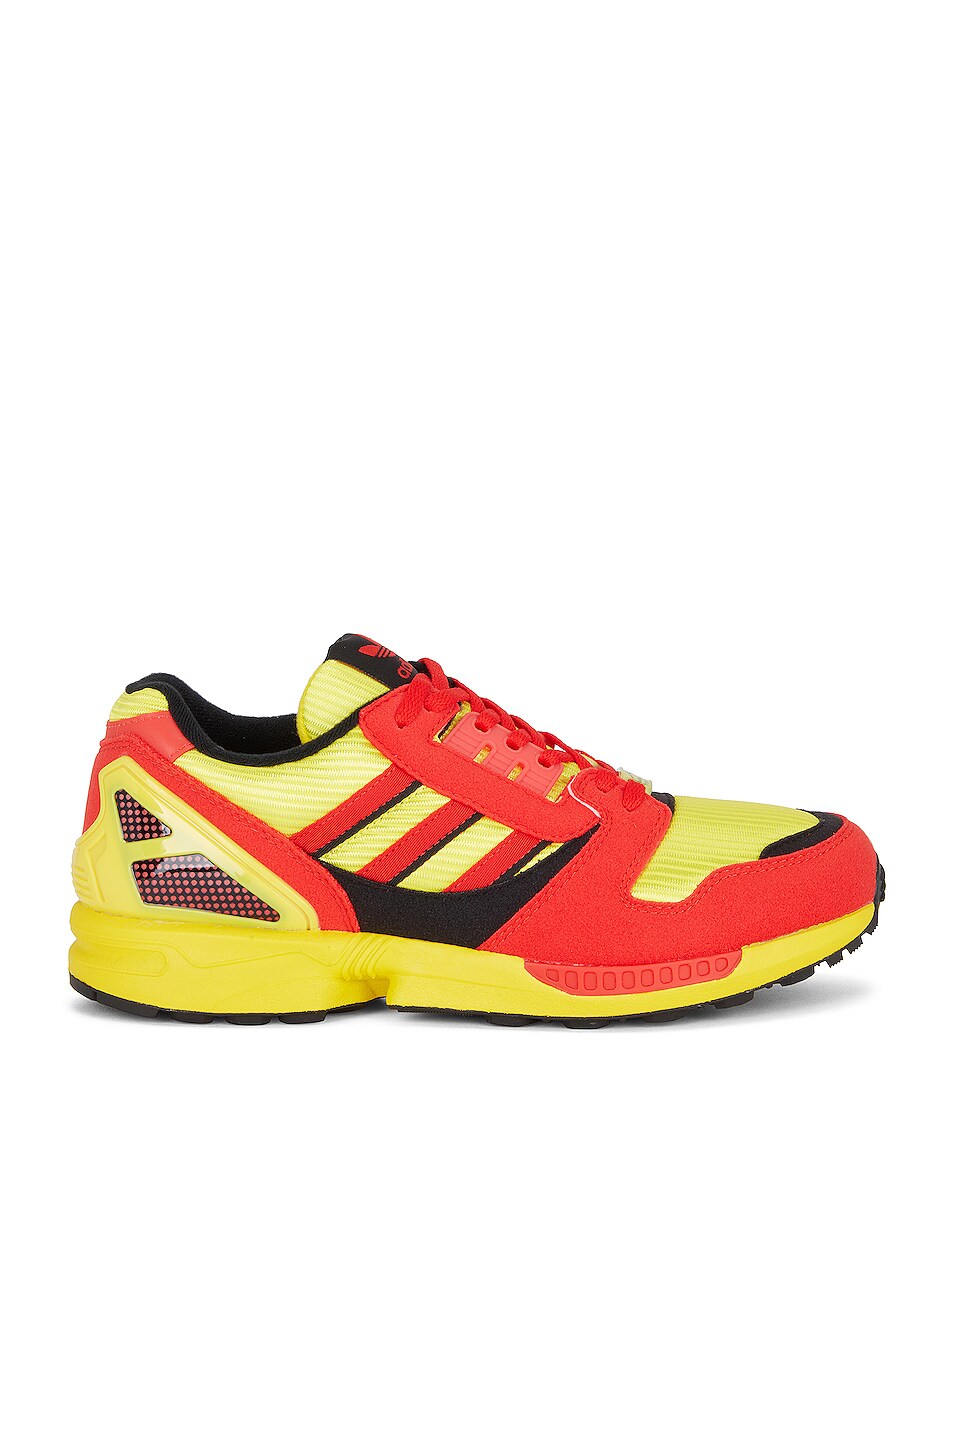 Image 1 of adidas Originals ZX 8000 Germany in Bright Yellow, Core Black & Red